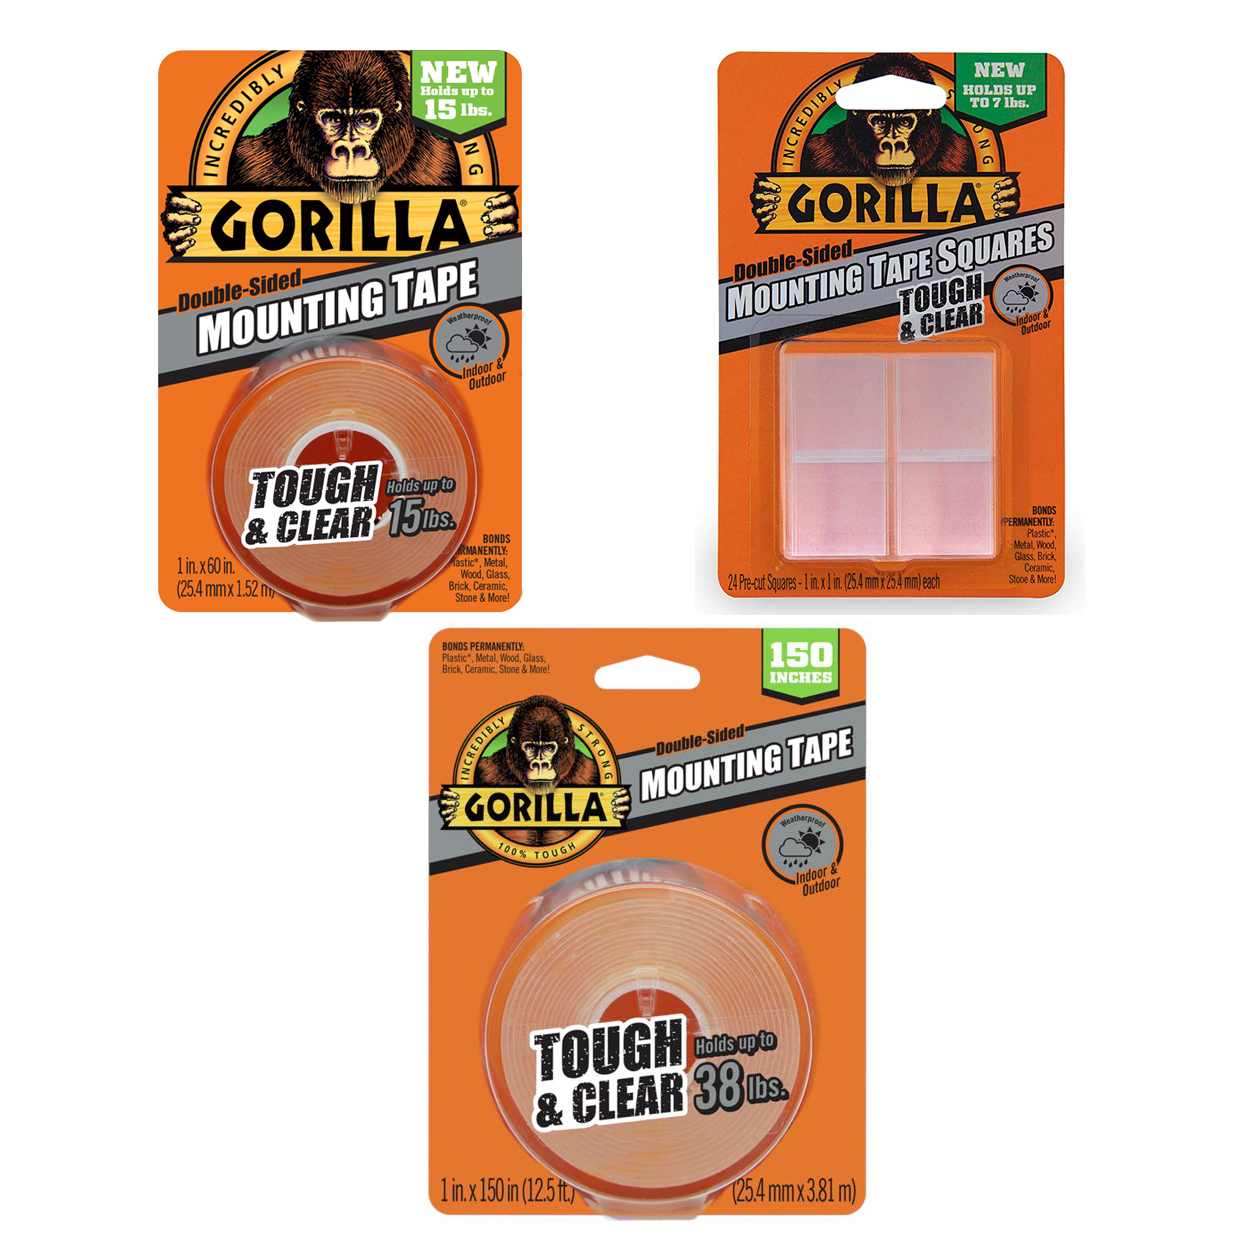 Gorilla Mounting Tape Squares Crystal Clear Pack of 6